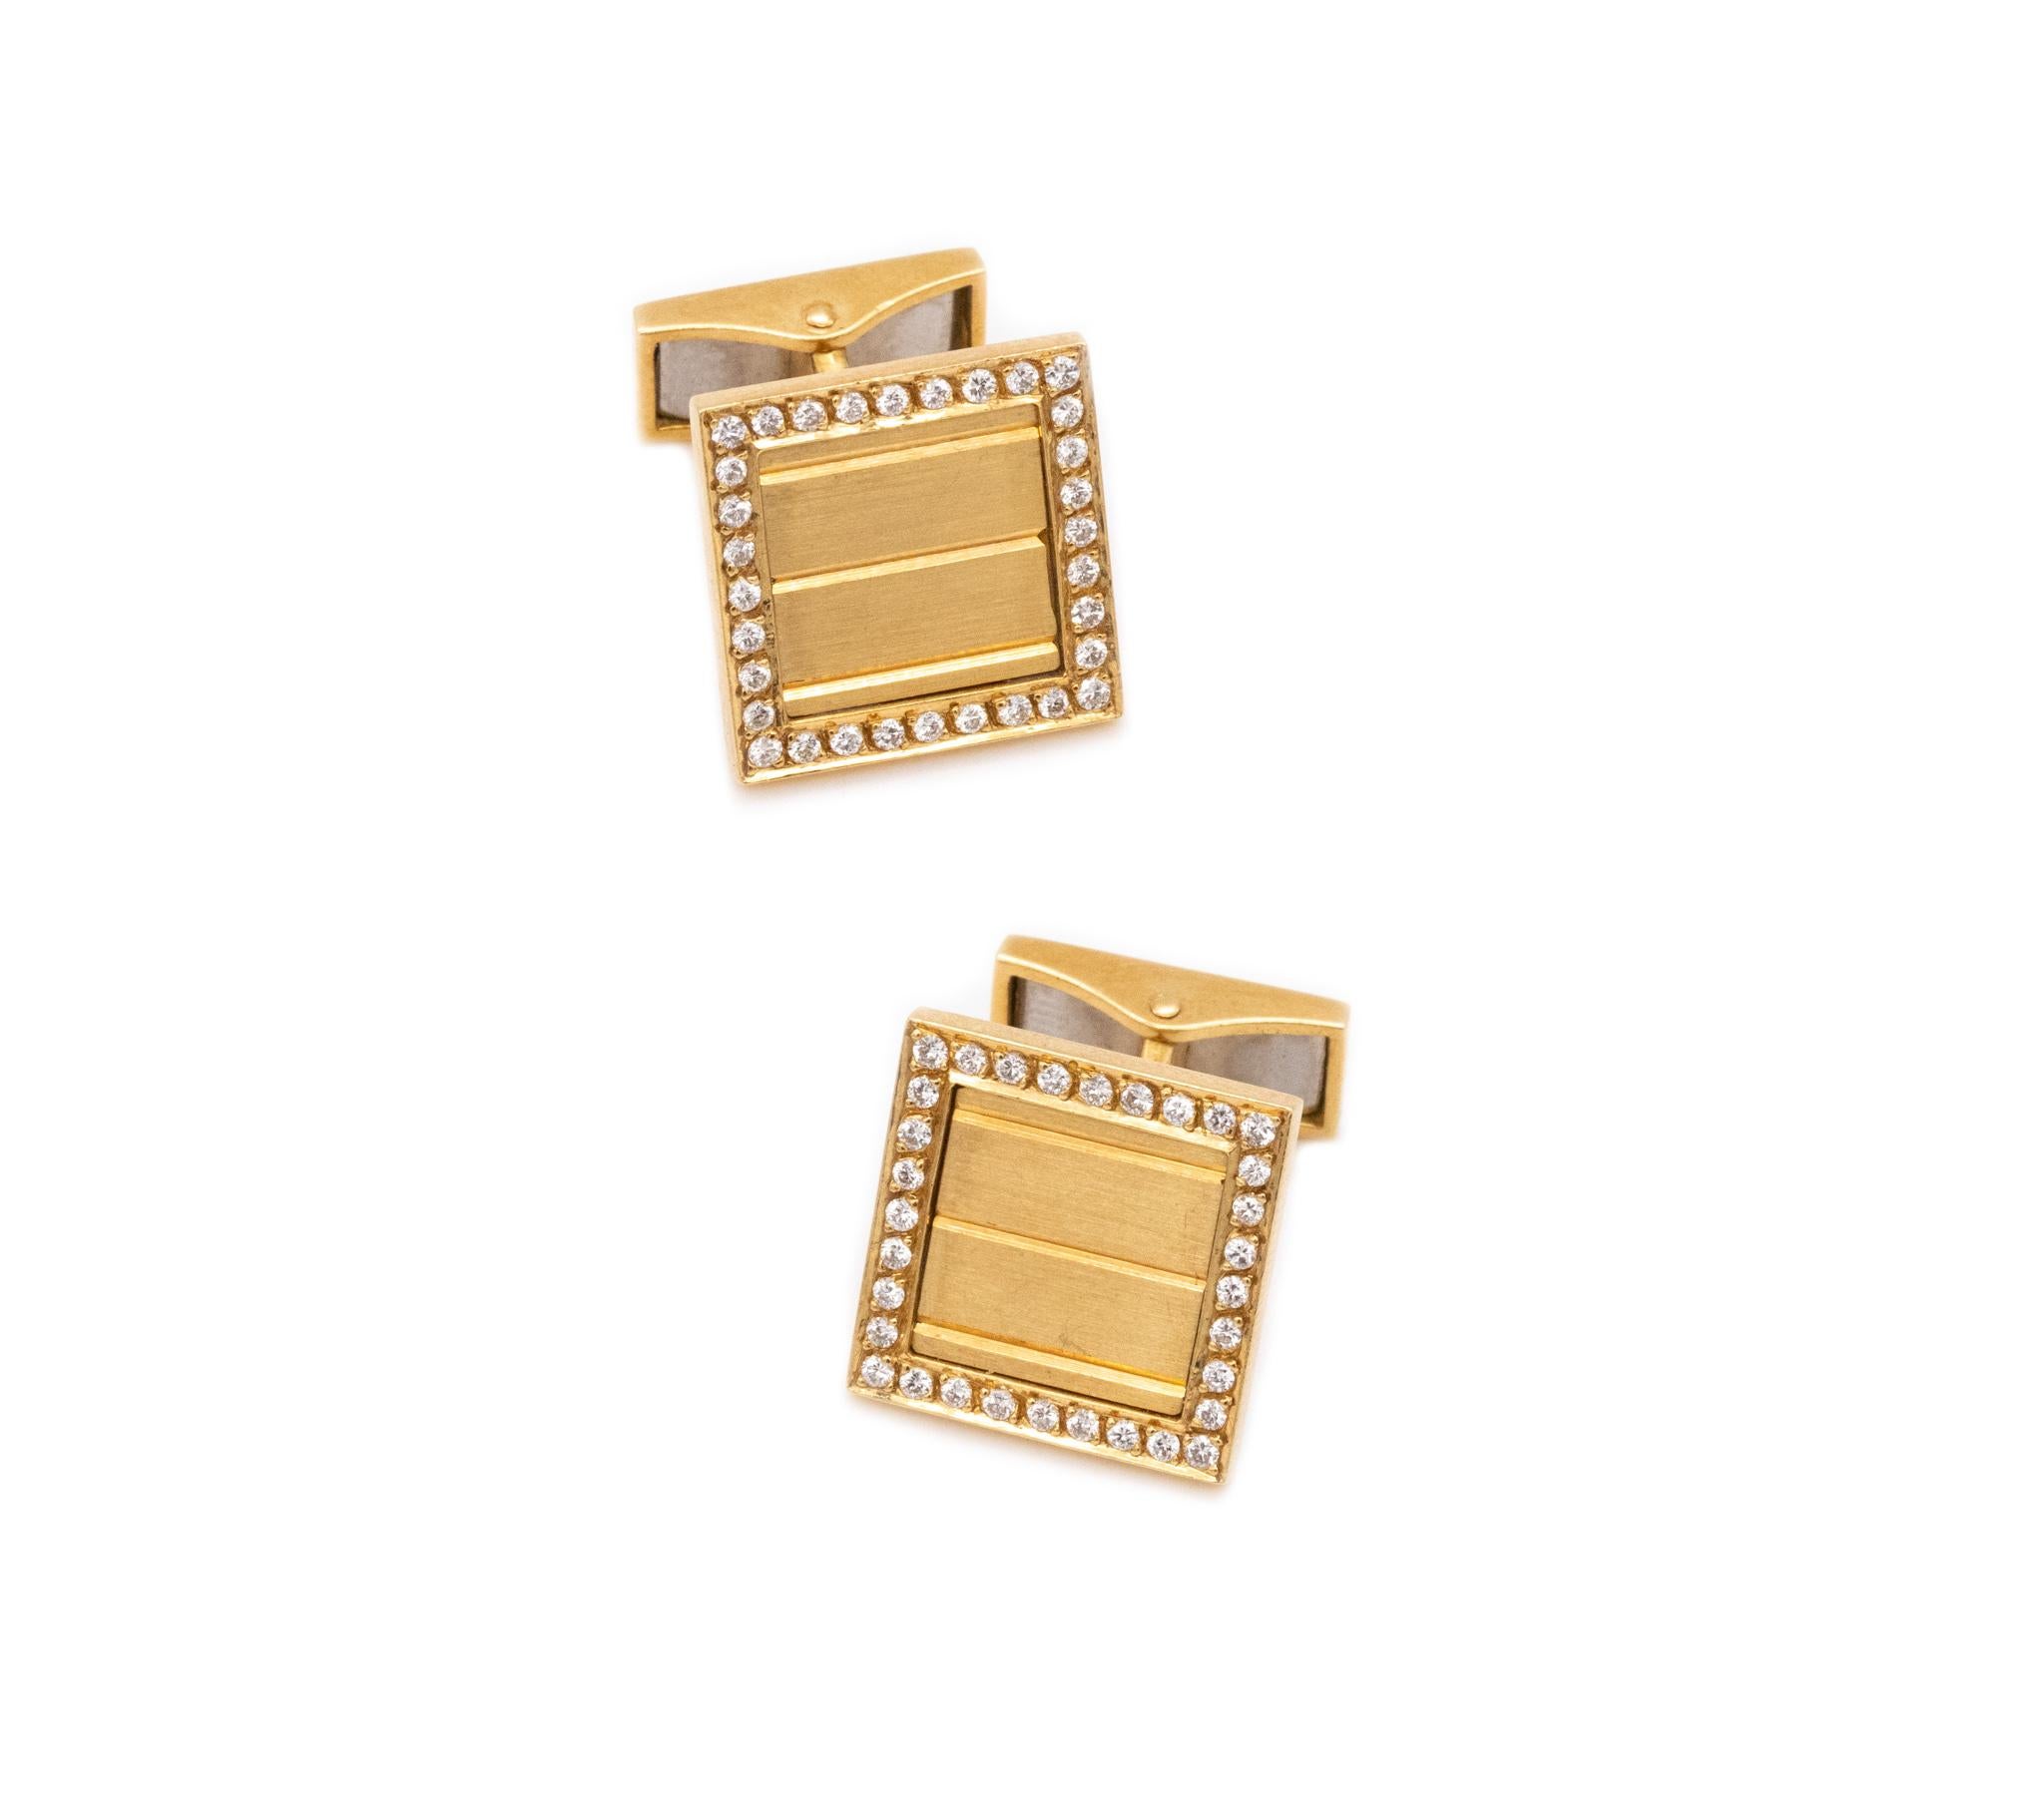 Pair of cufflinks designed by Maison Gerard. 

Rare pieces made in Paris France by one of the most exclusive Parisian jewelry houses. These gorgeous pieces are crafted in solid 18 karats yellow gold and are suited, with a mechanical security T